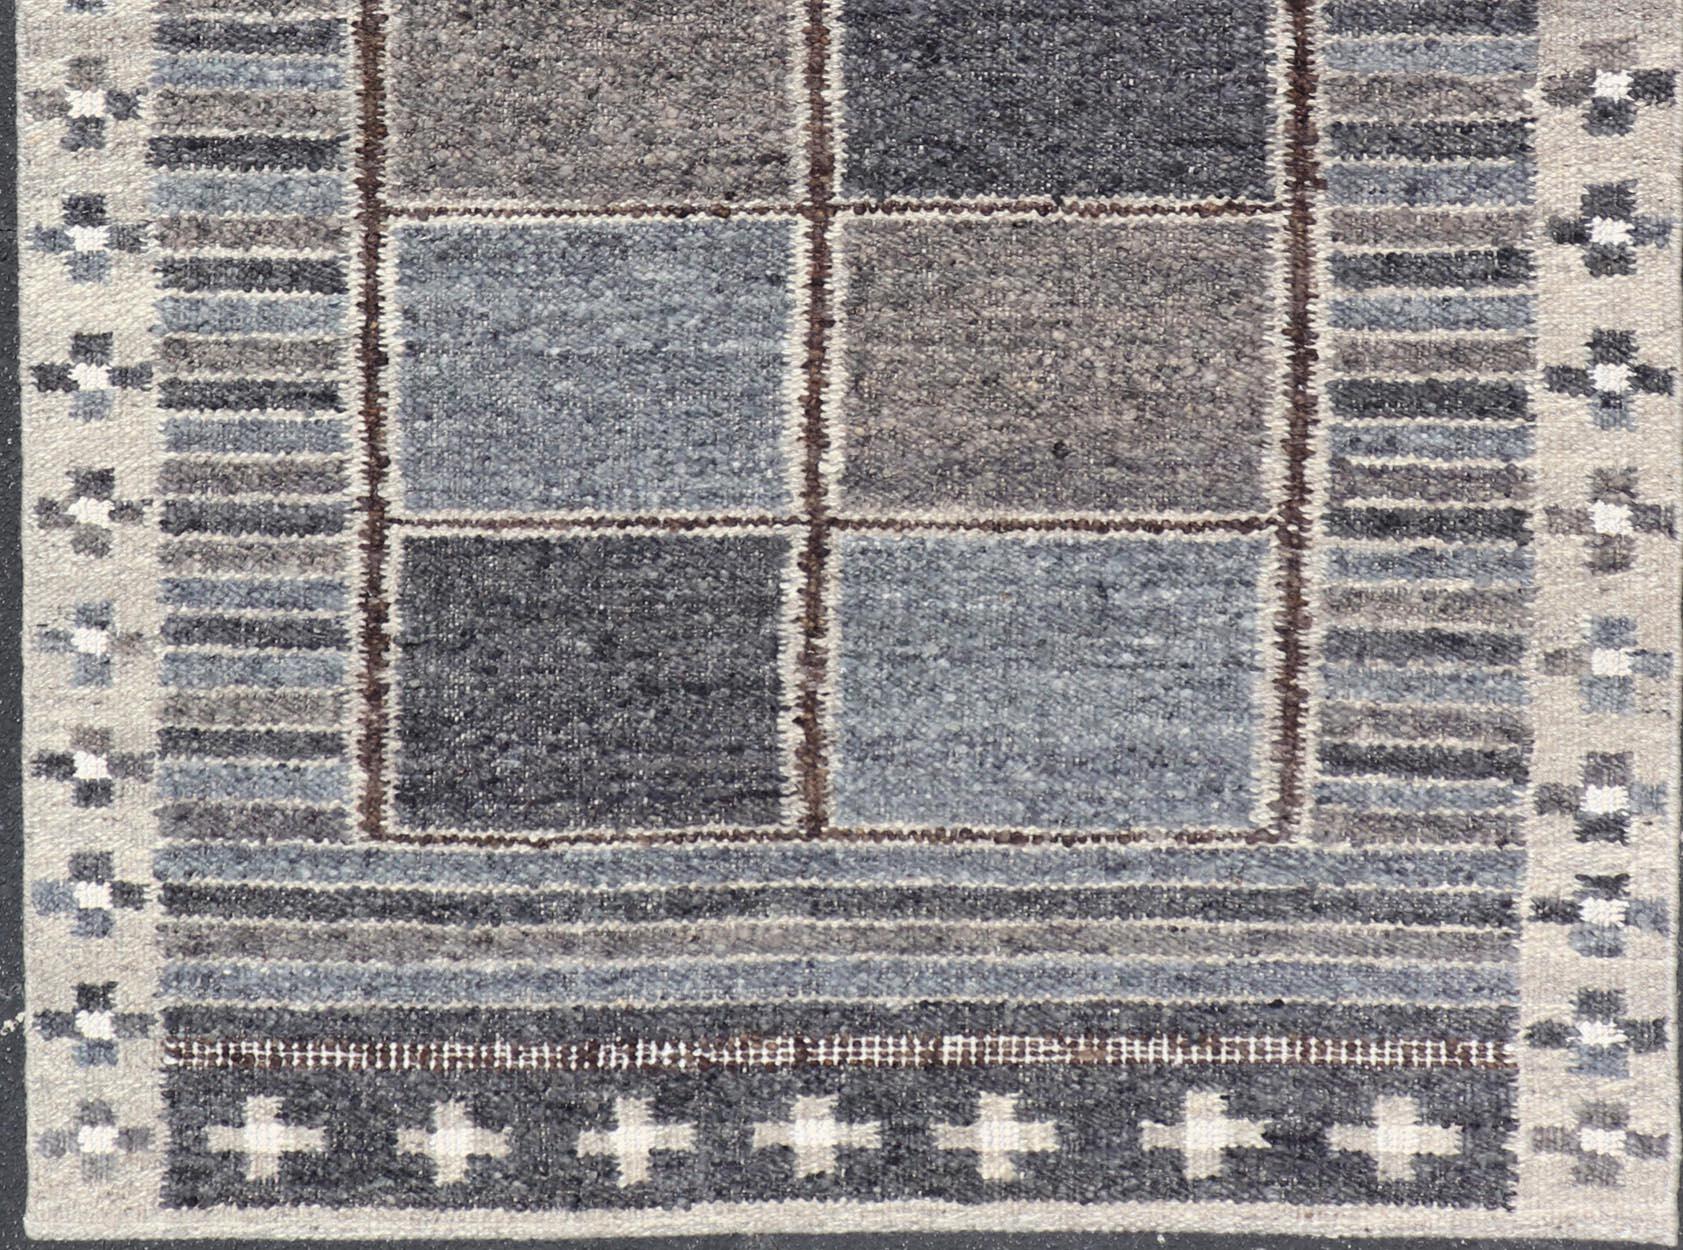 Modern Scandinavian/Swedish Design Rug in Blue, Charcoal, Gray and Cream For Sale 2